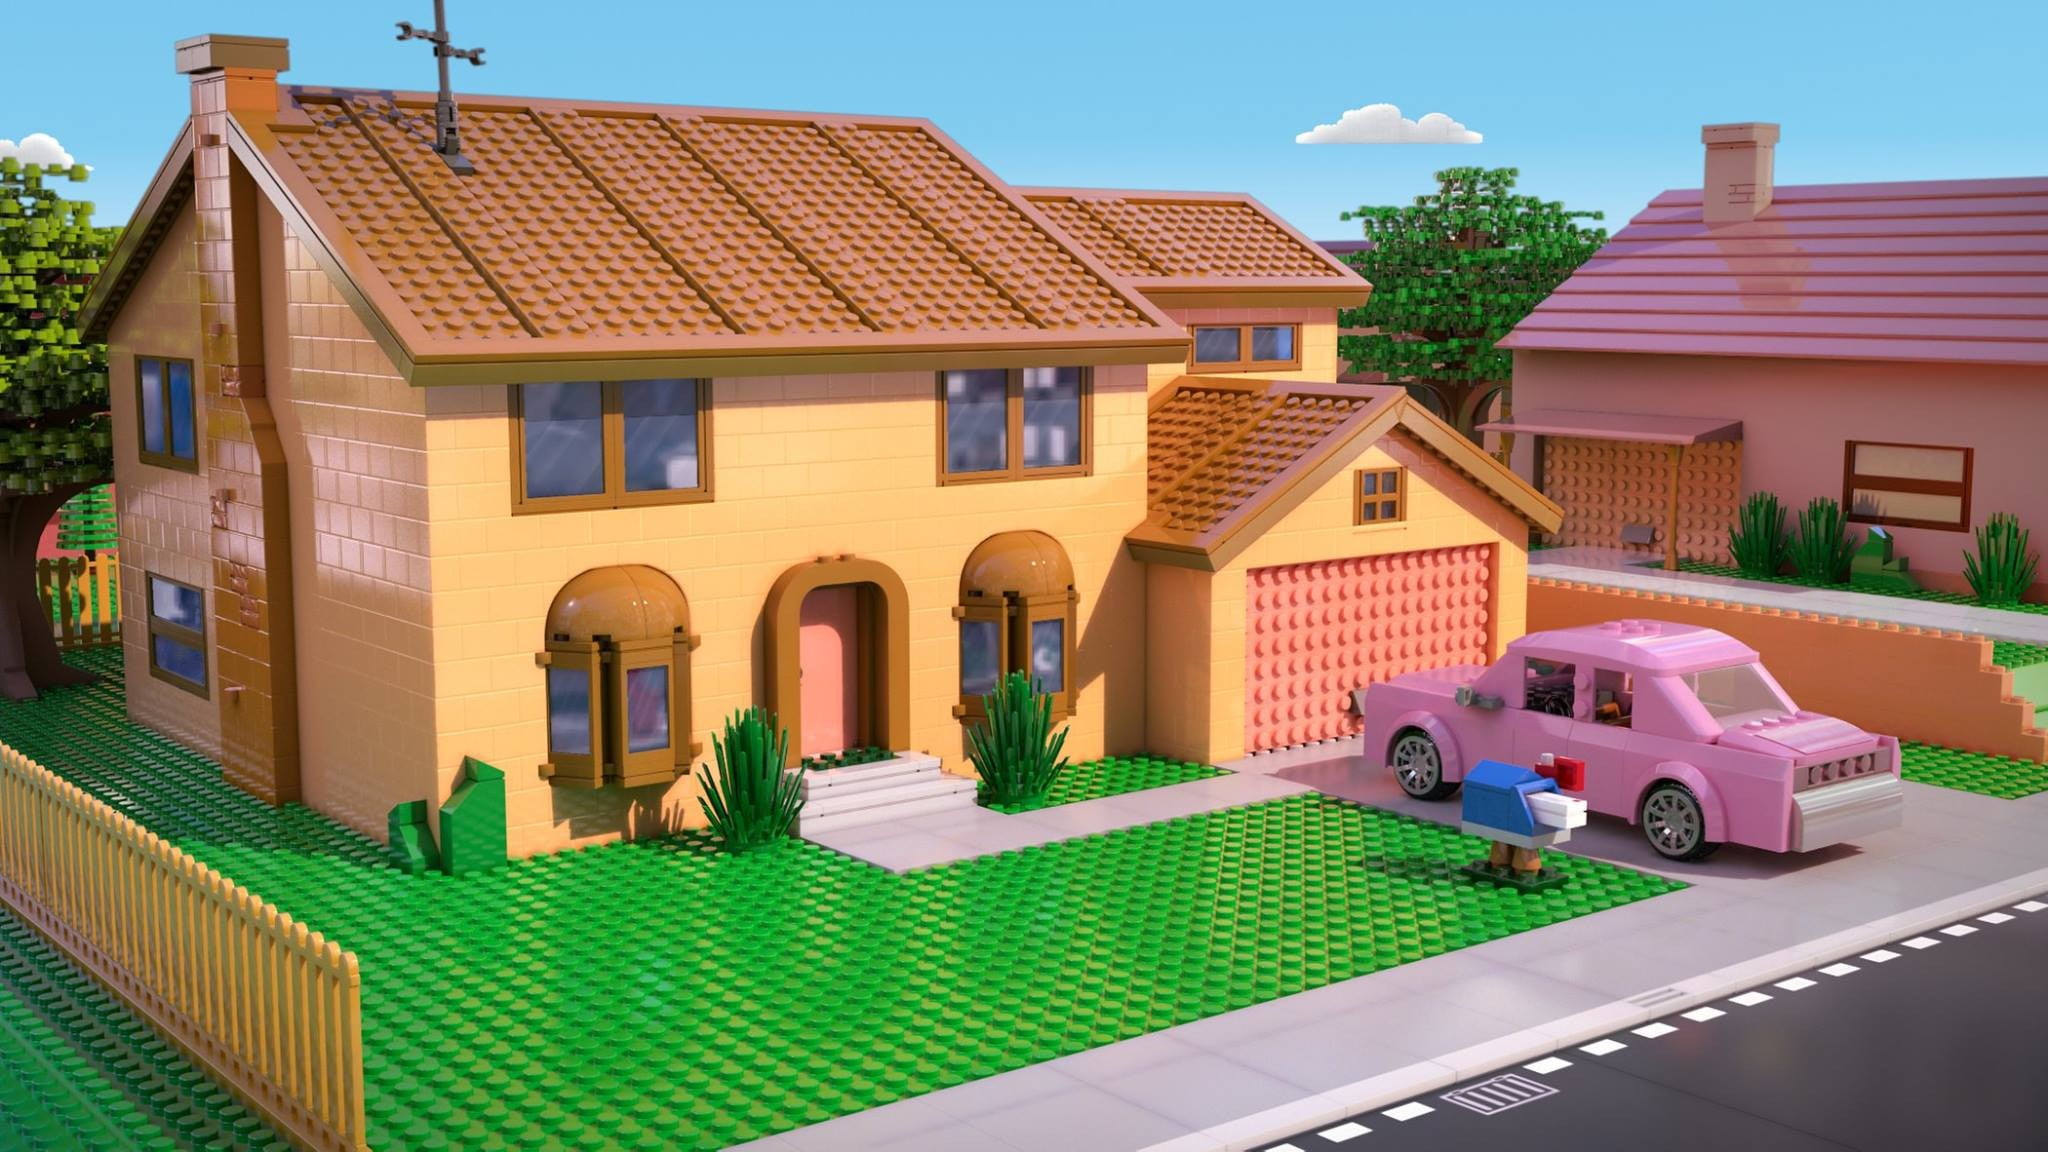 beige and brown concrete house 3D illustration, LEGO, The Simpsons